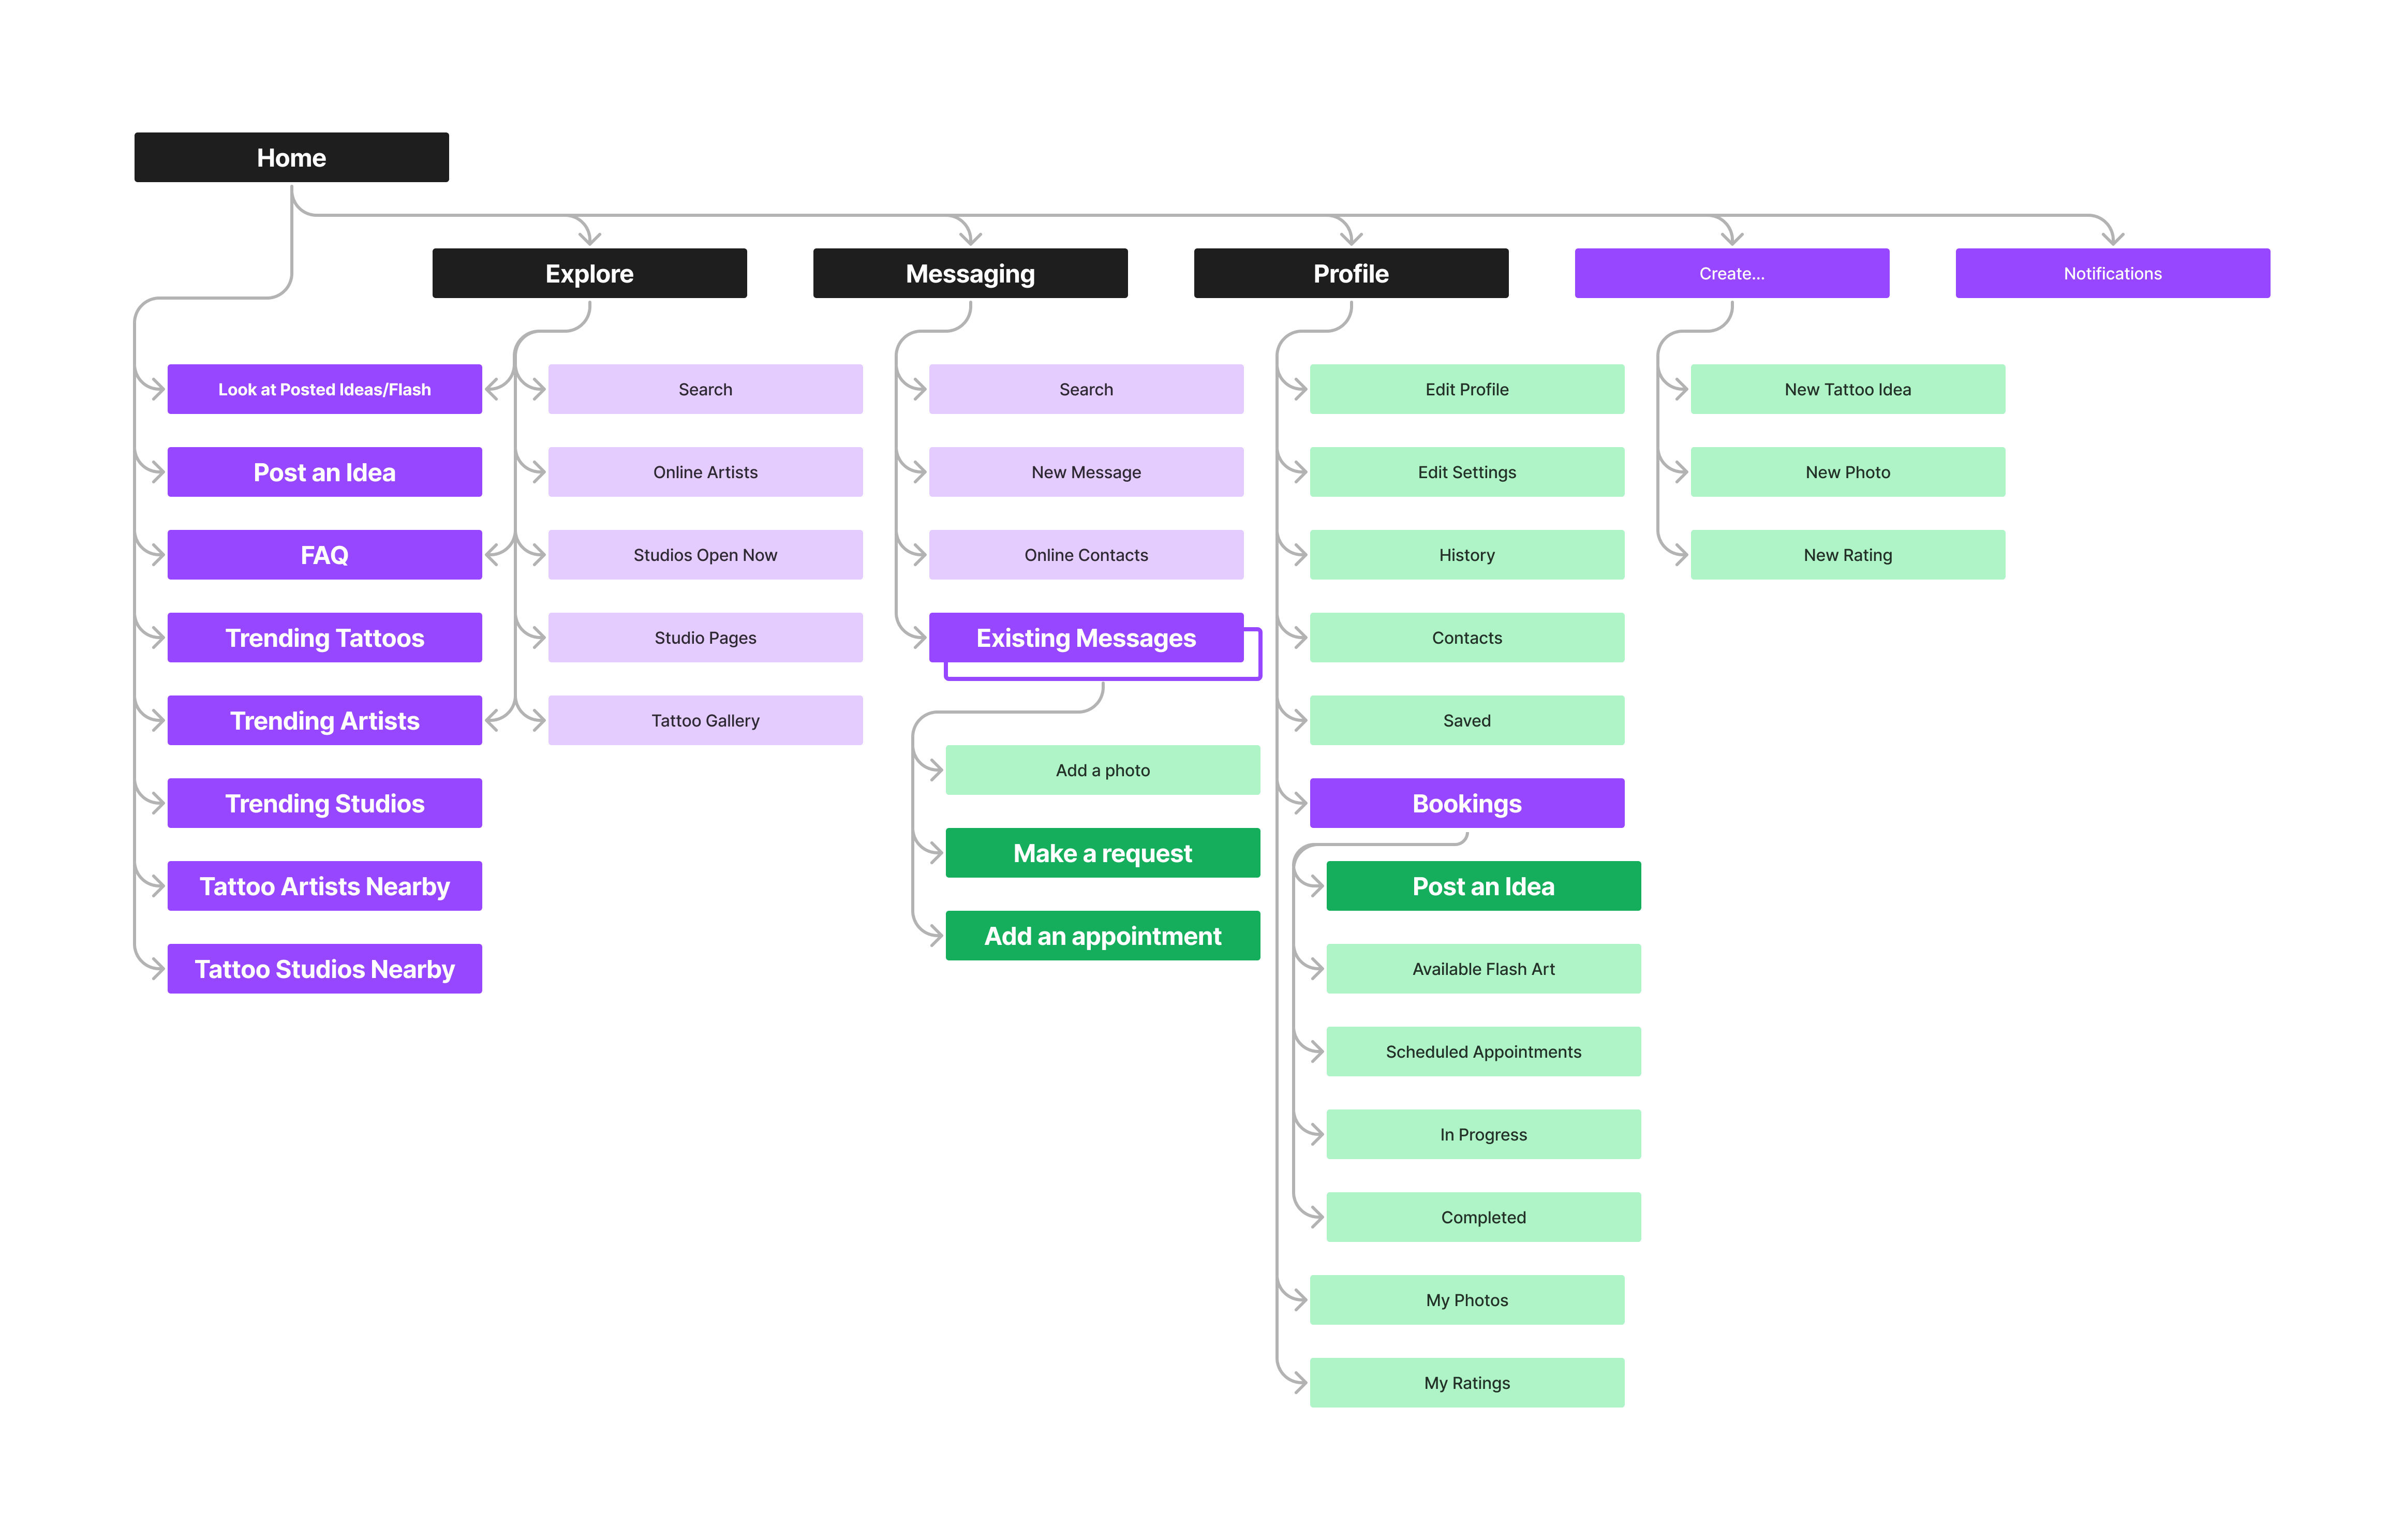 A large sitemap showing the information architecture of the mobile app.